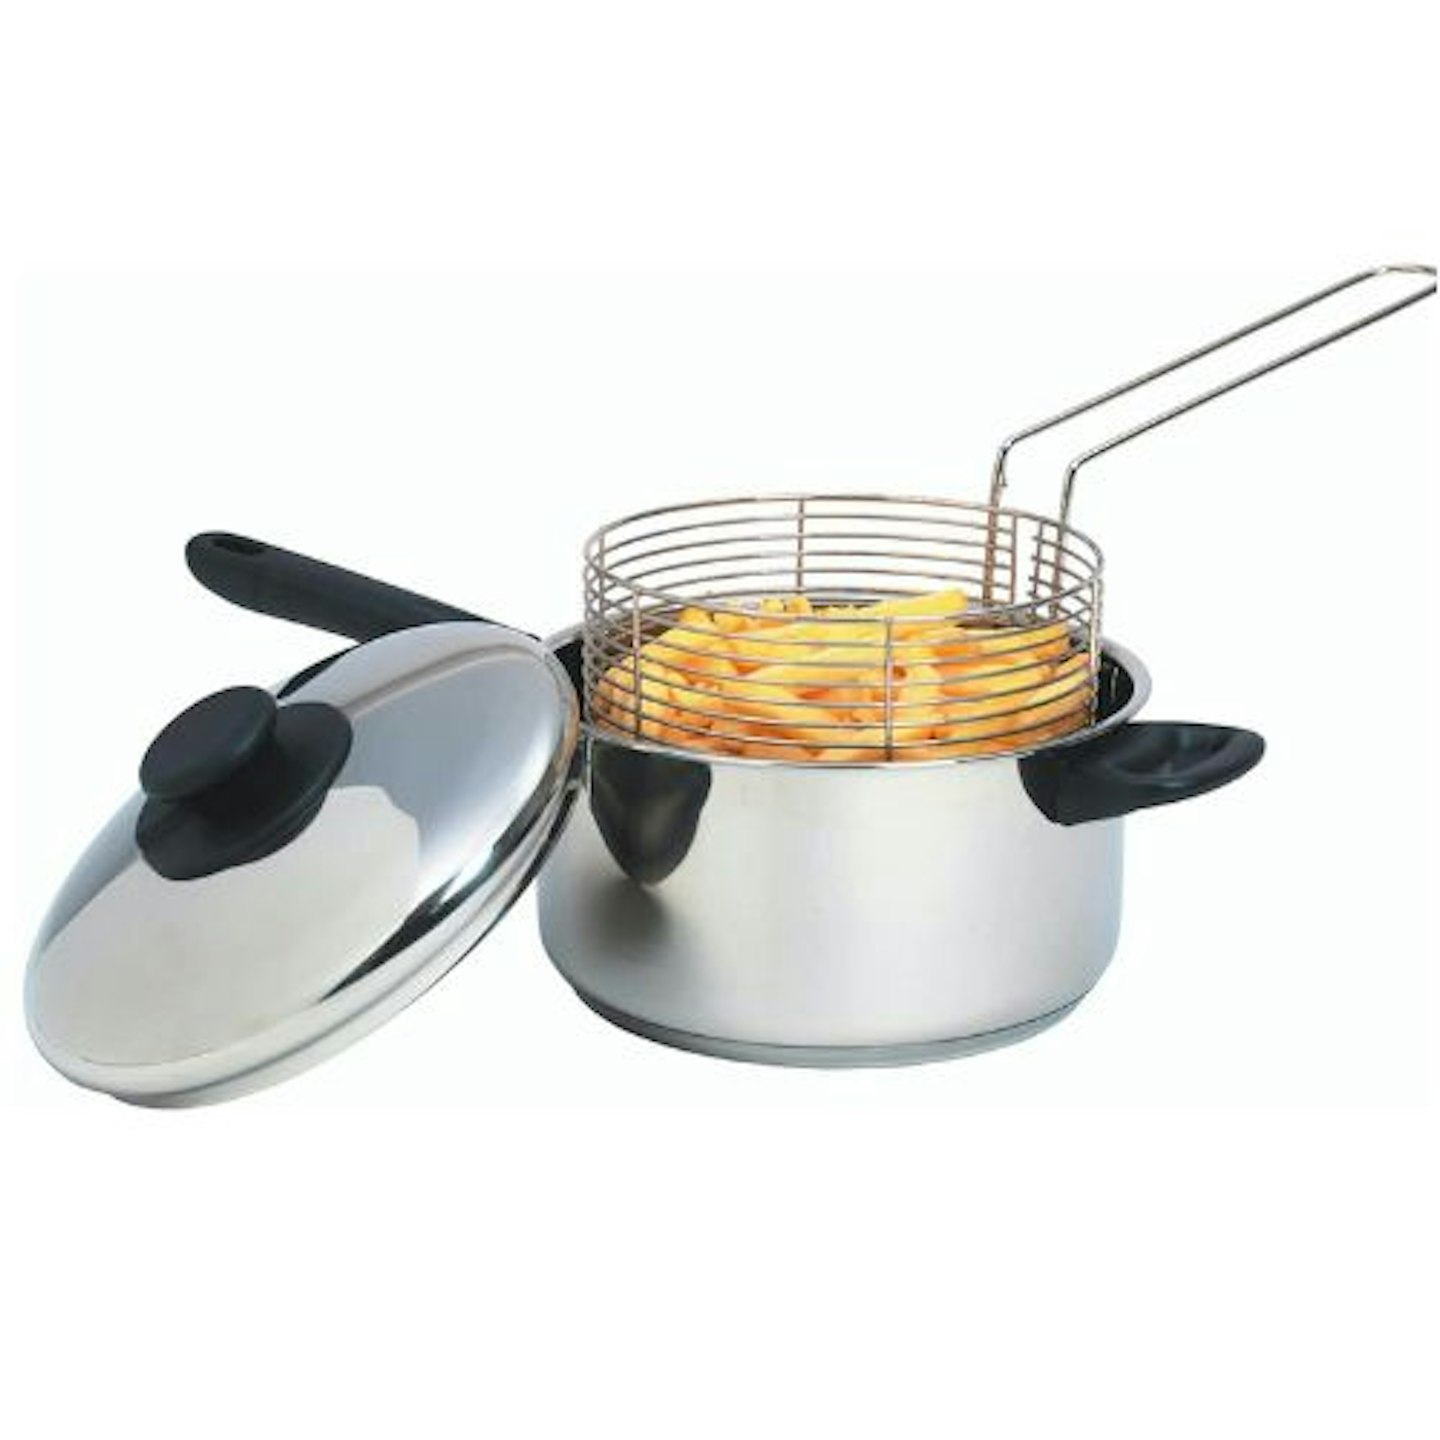 Best Chip Pan For Crispy Chips In Your Own Kitchen